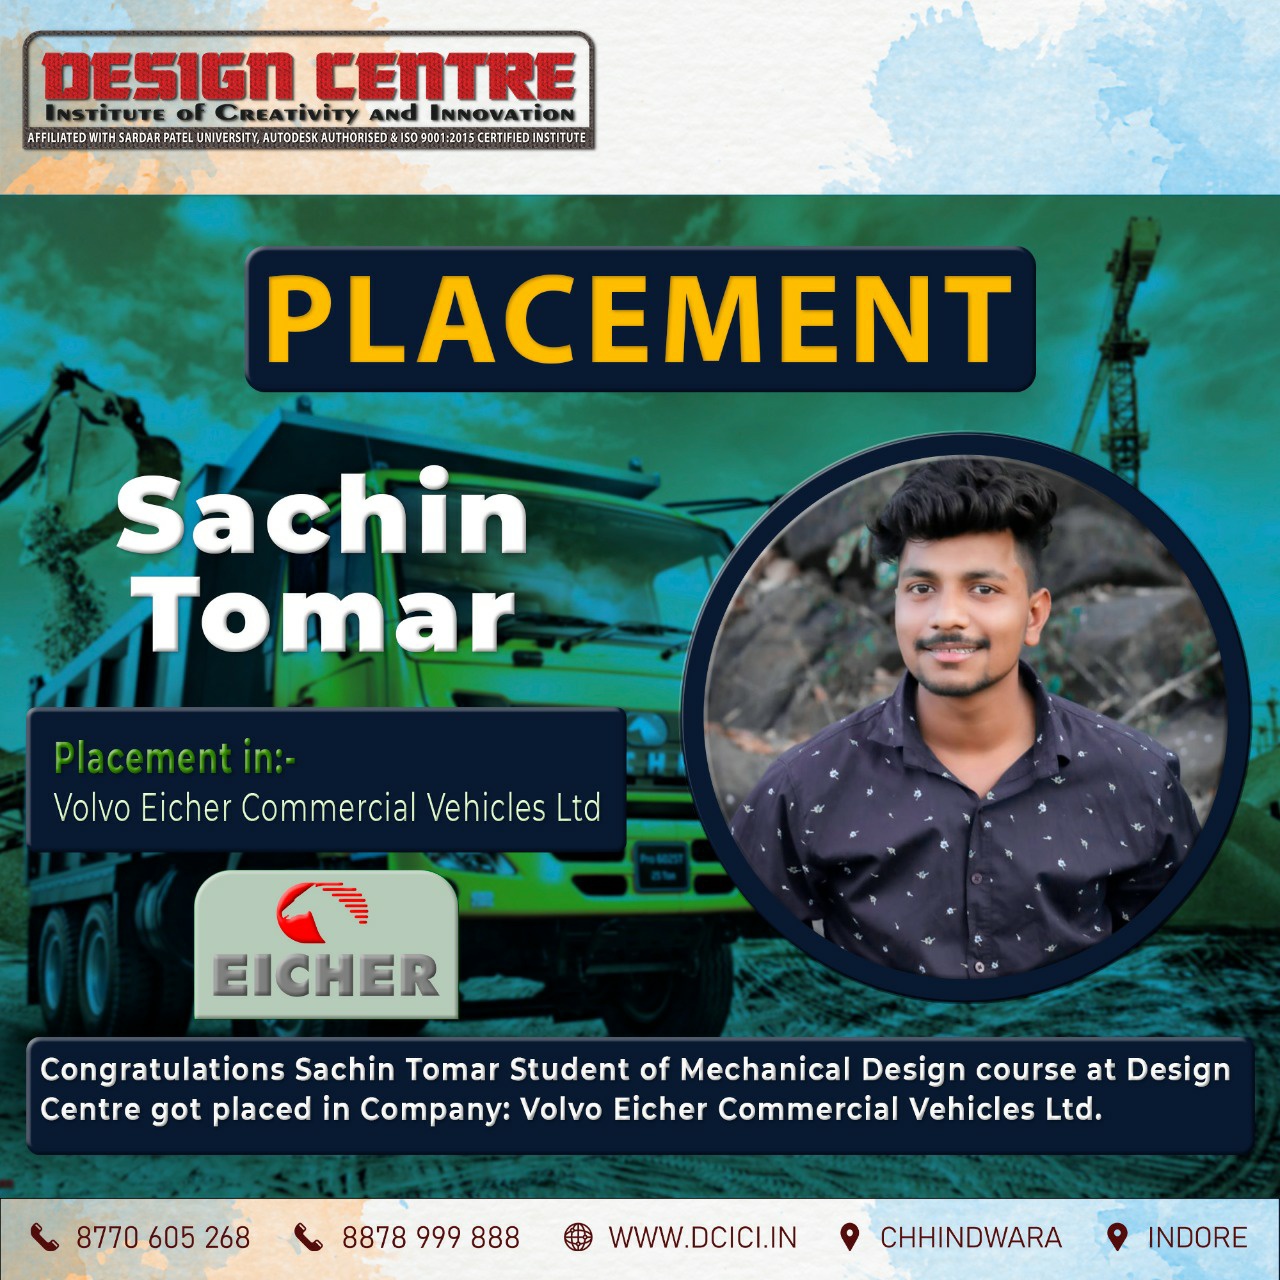 Sachin Tomar Student of Mechanical Design course at Design Centre got placed in VE Commercial Vehicles Ltd.